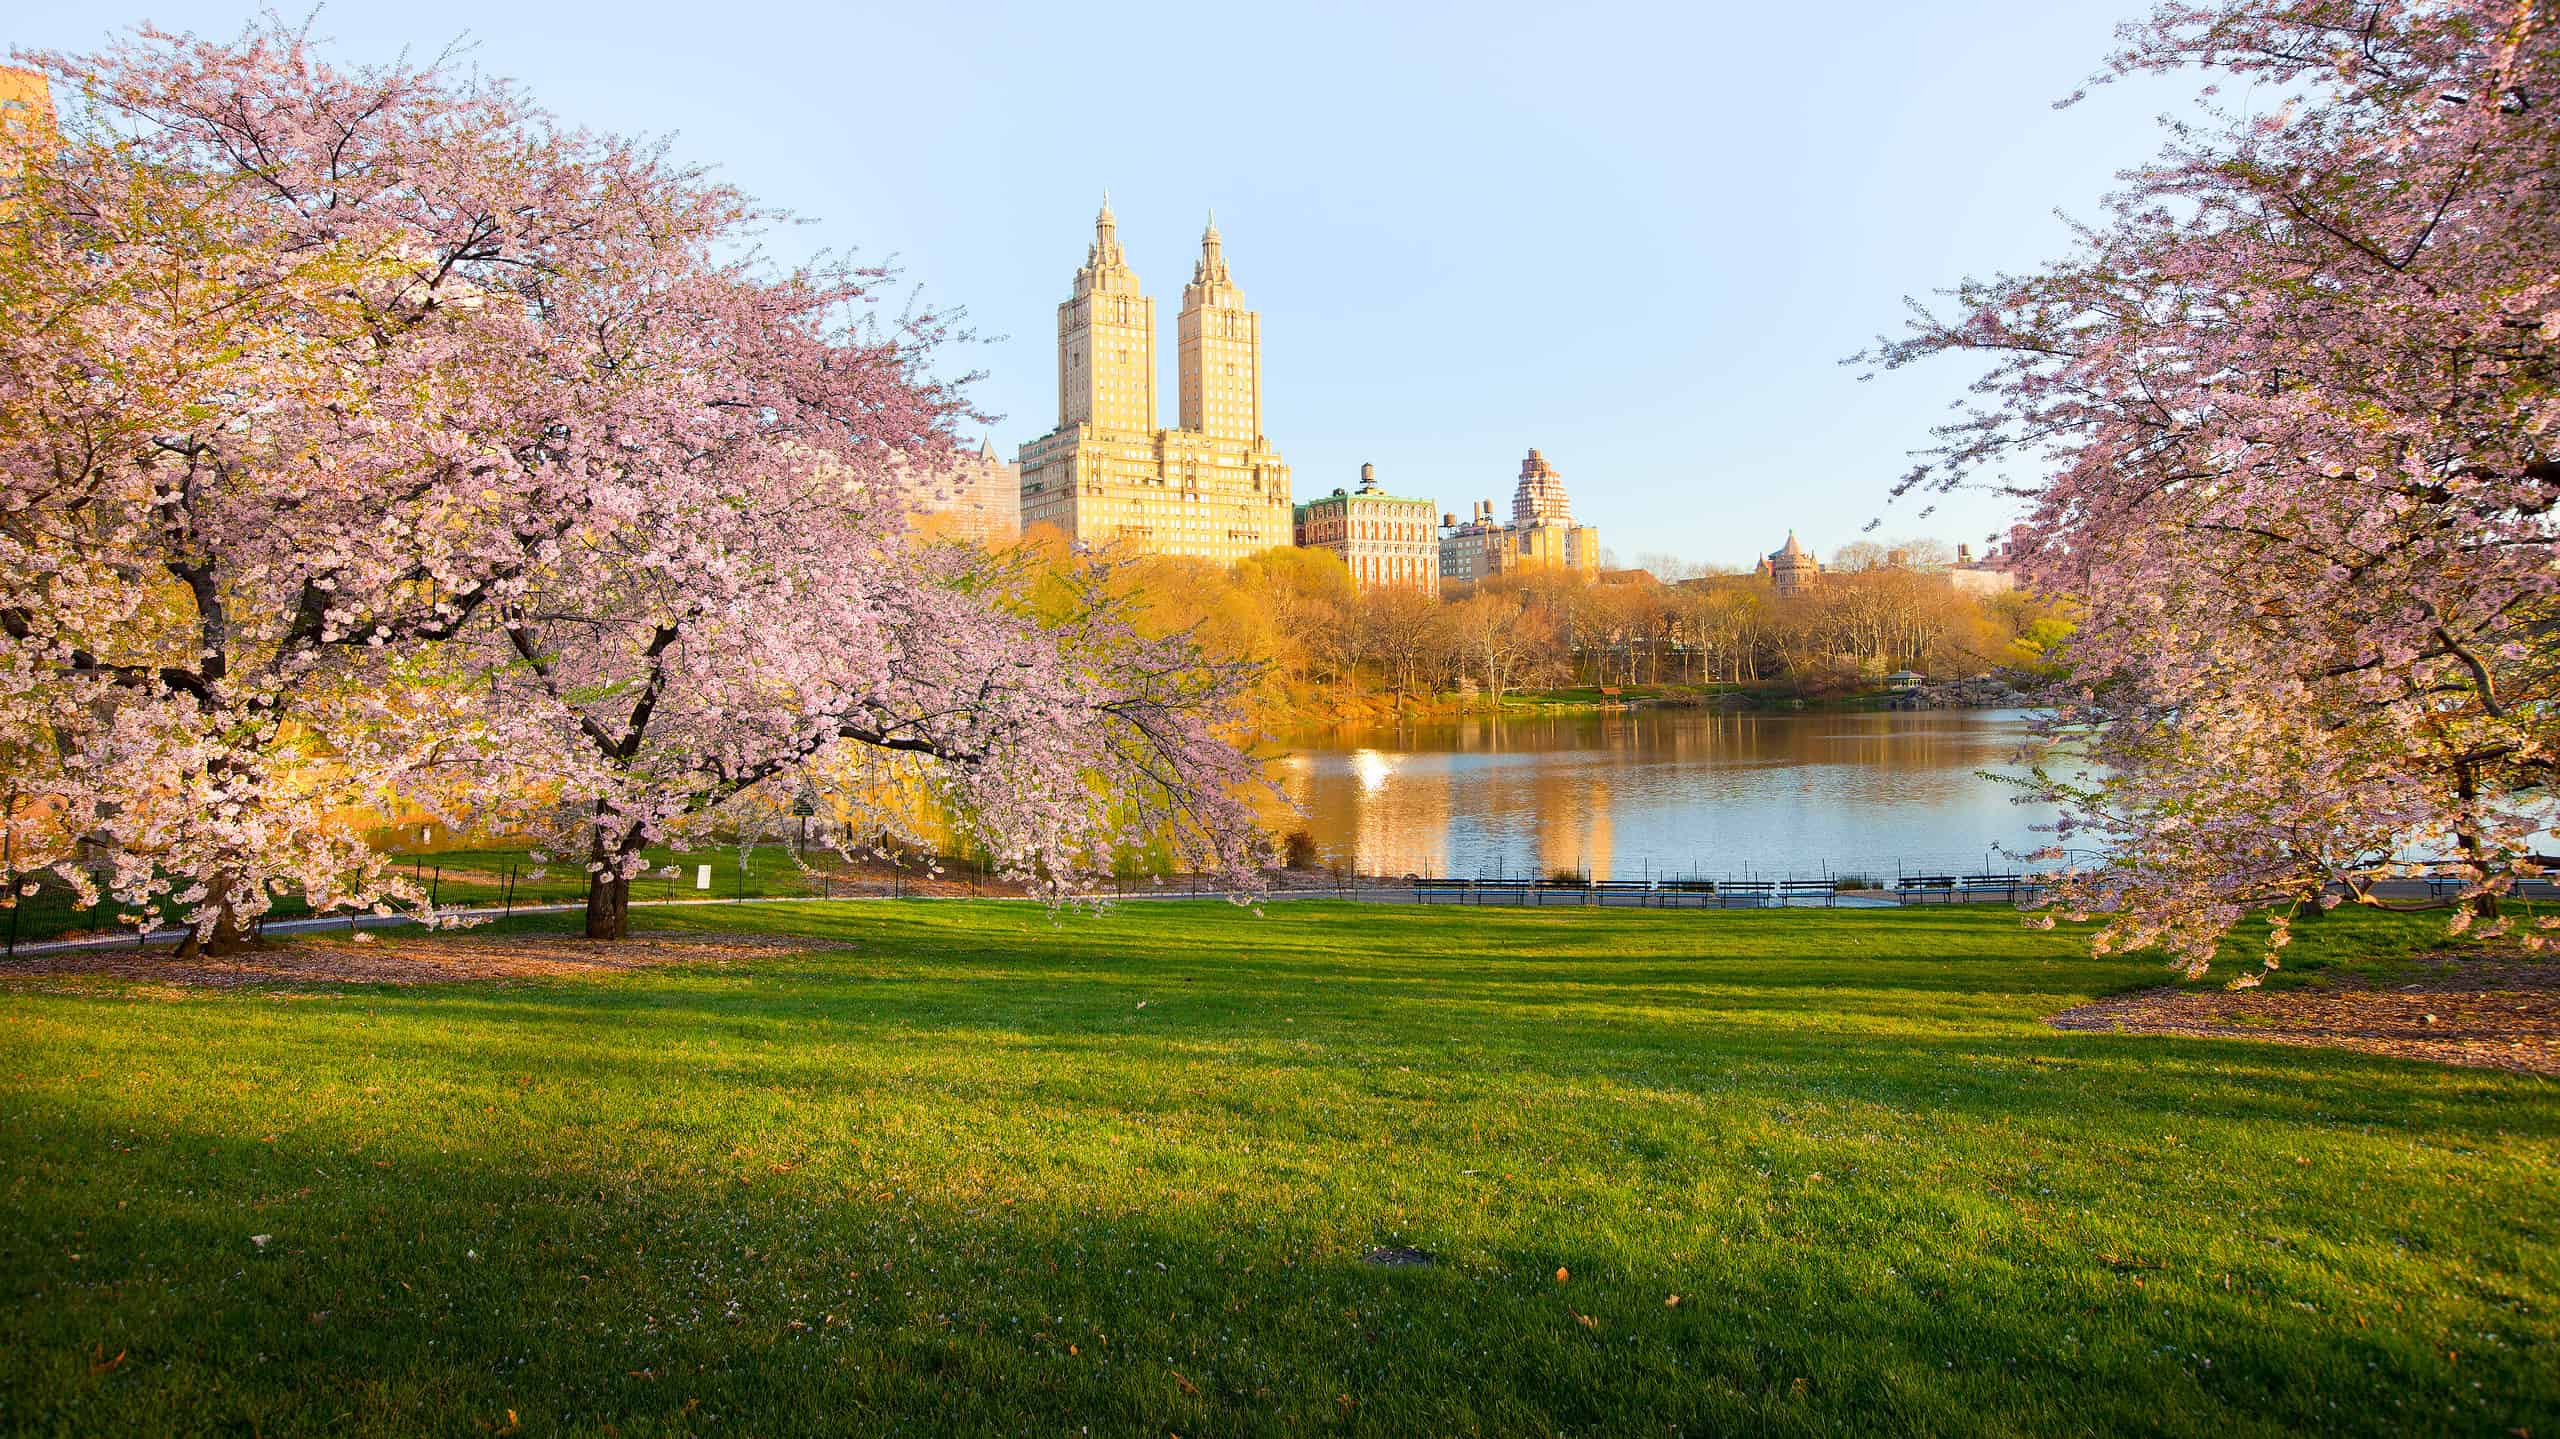 Cherry blossom at the Lake at Central Park and skyline of buildings in Manhattan, New York City, NY, United States